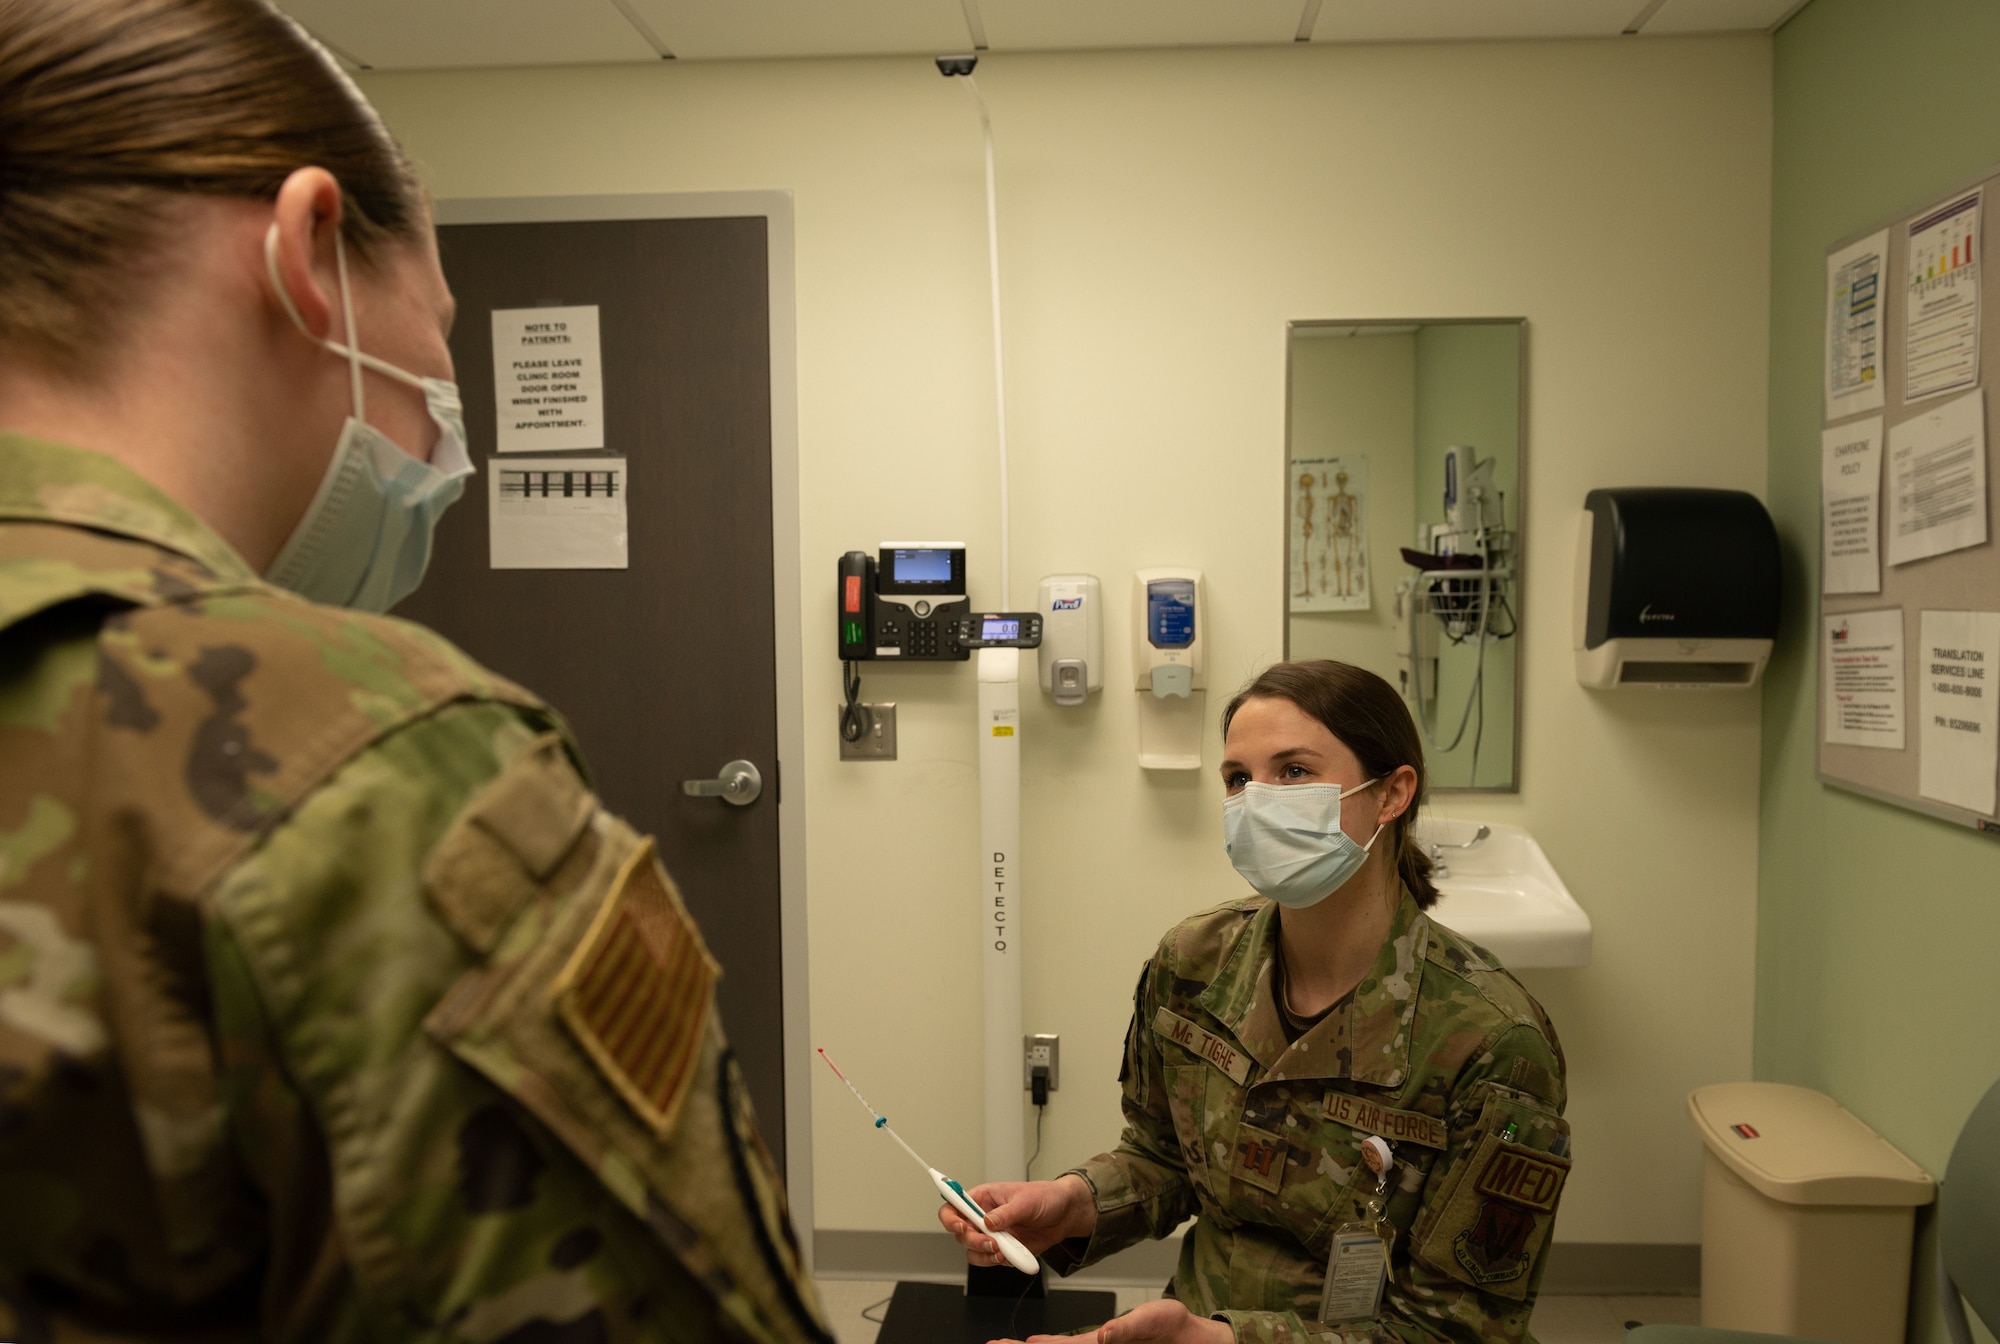 Capt. Krystal Mc Tighe, 4th Medical Group family physician, speaks to patient about an IUD at Seymour Johnson Air Force Base, North Carolina, Jan. 30, 2023. Active-duty females now have access to long-term contraceptives, which includes oral contraceptive, patches, rings, shots, rods, natural family planning and intrauterine devices through the walk-in clinic at the 4th Medical Group. (U.S. Air Force photo by Rebecca Sirimarco-Lang)